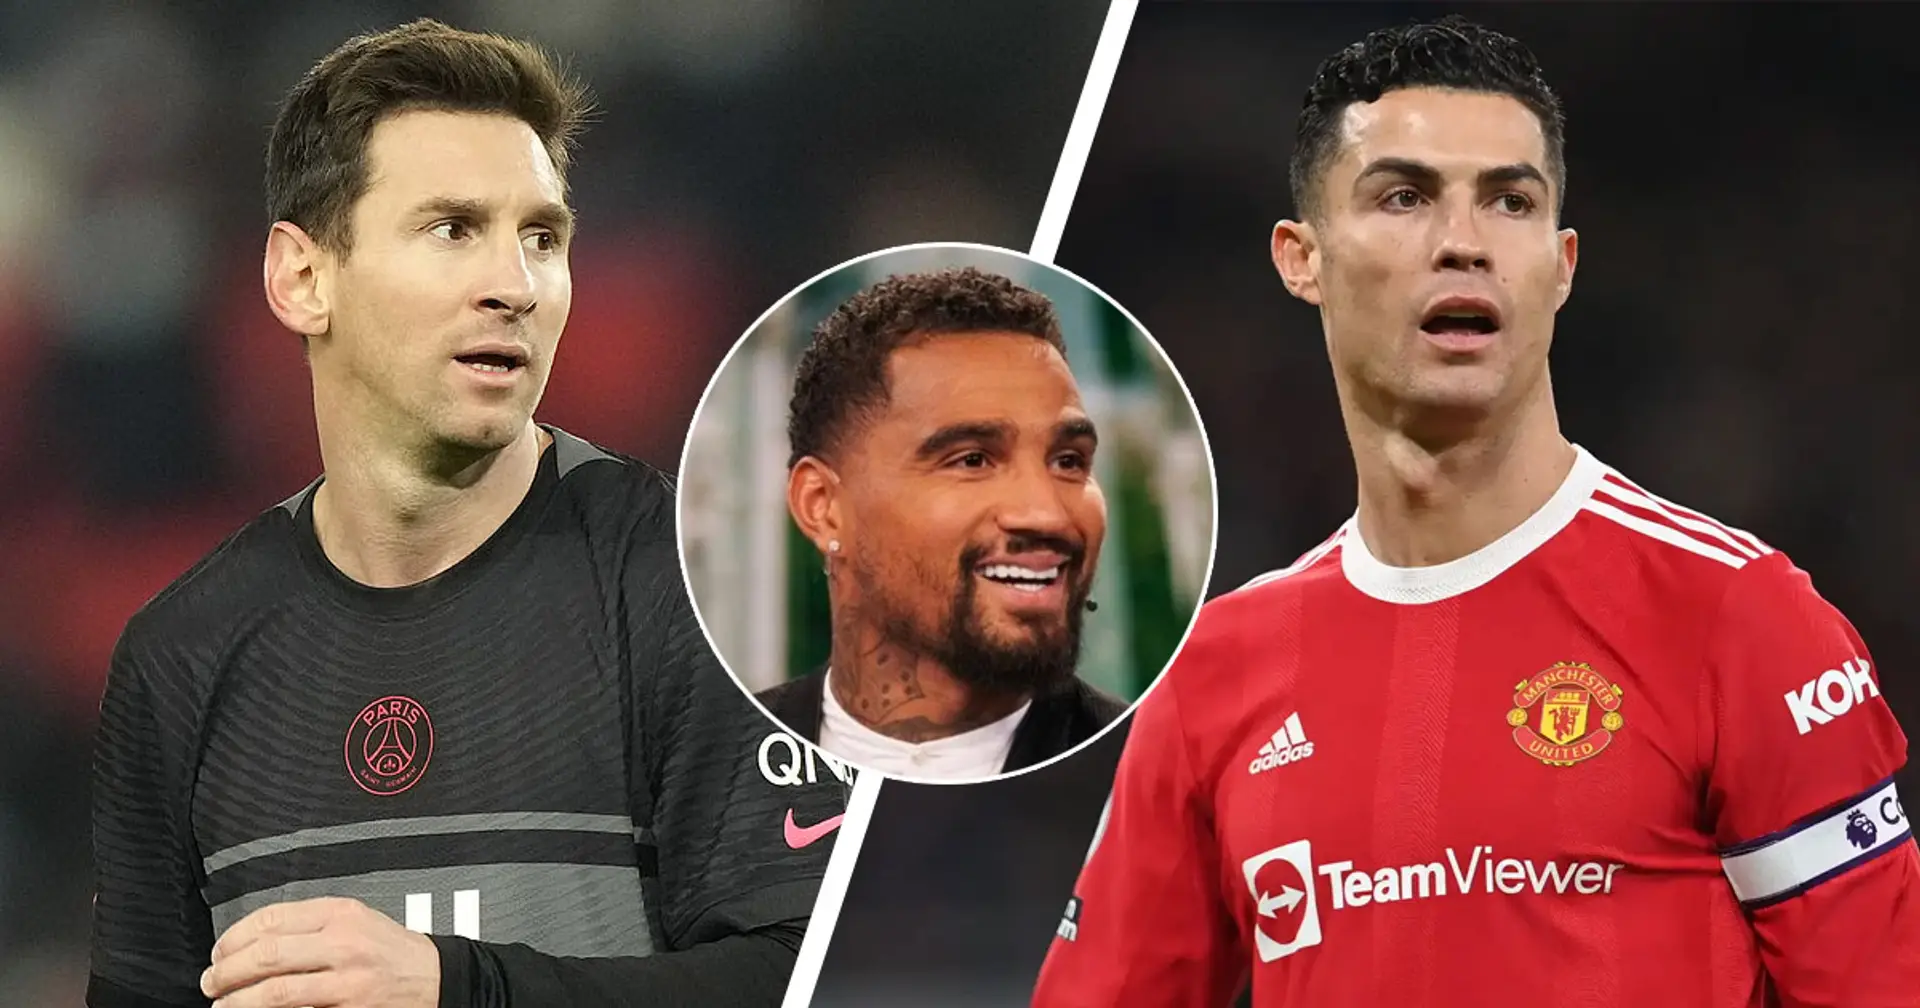 Boateng explains why Ronaldo is a better role model for youngsters despite Messi being the superior player